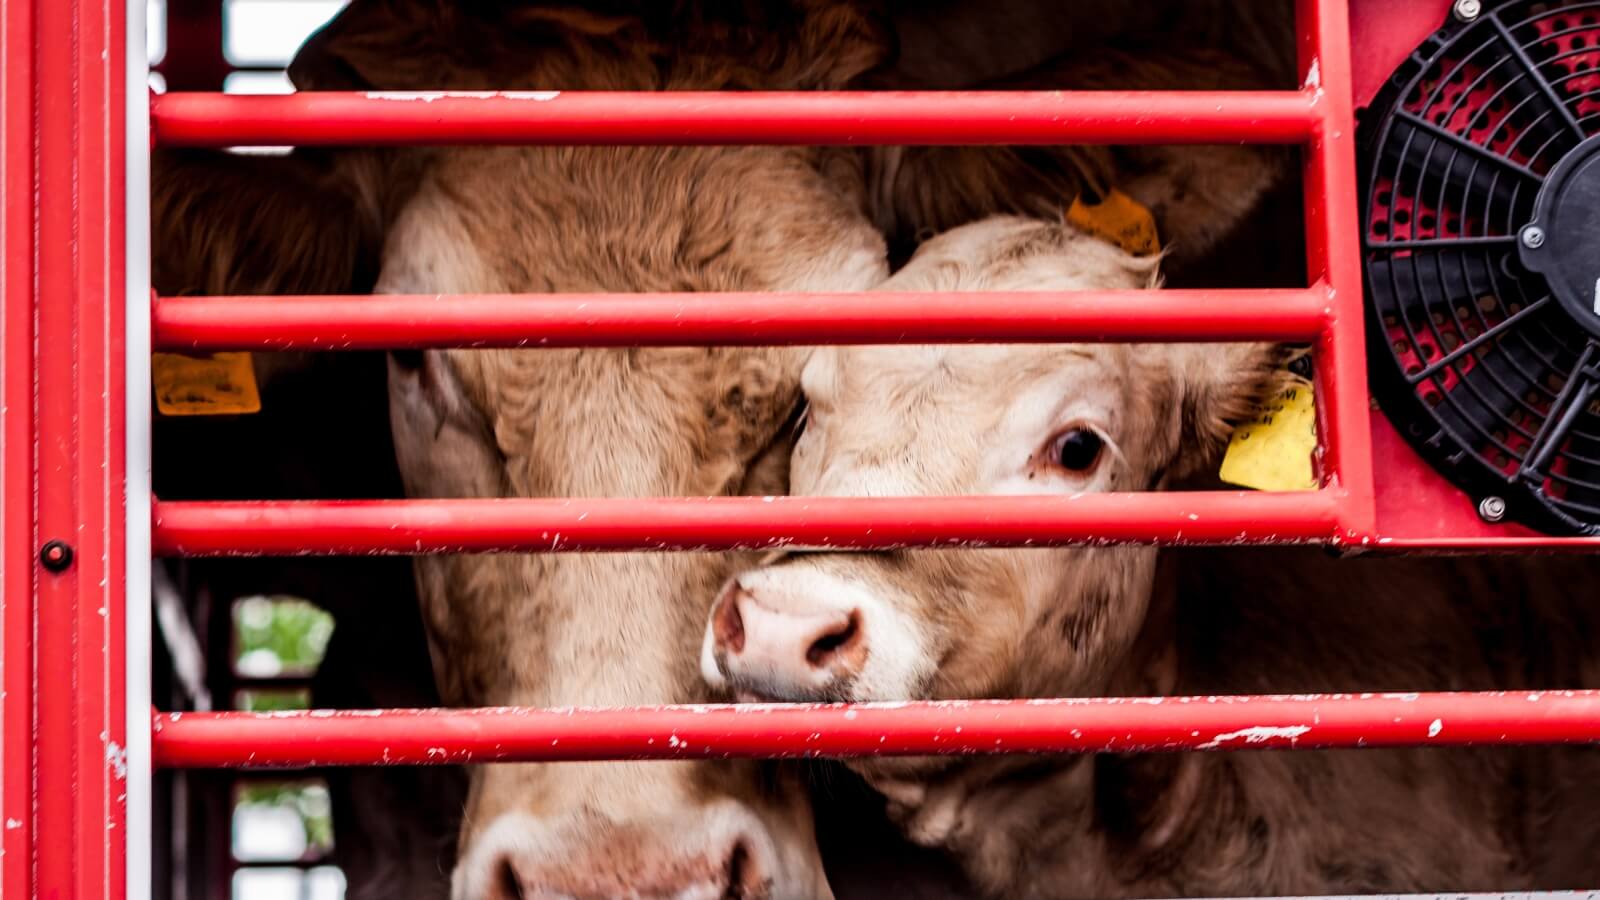 Welsh Government Announces CCTV Will Be Mandatory In Slaughterhouses, Animal Activists Skeptical